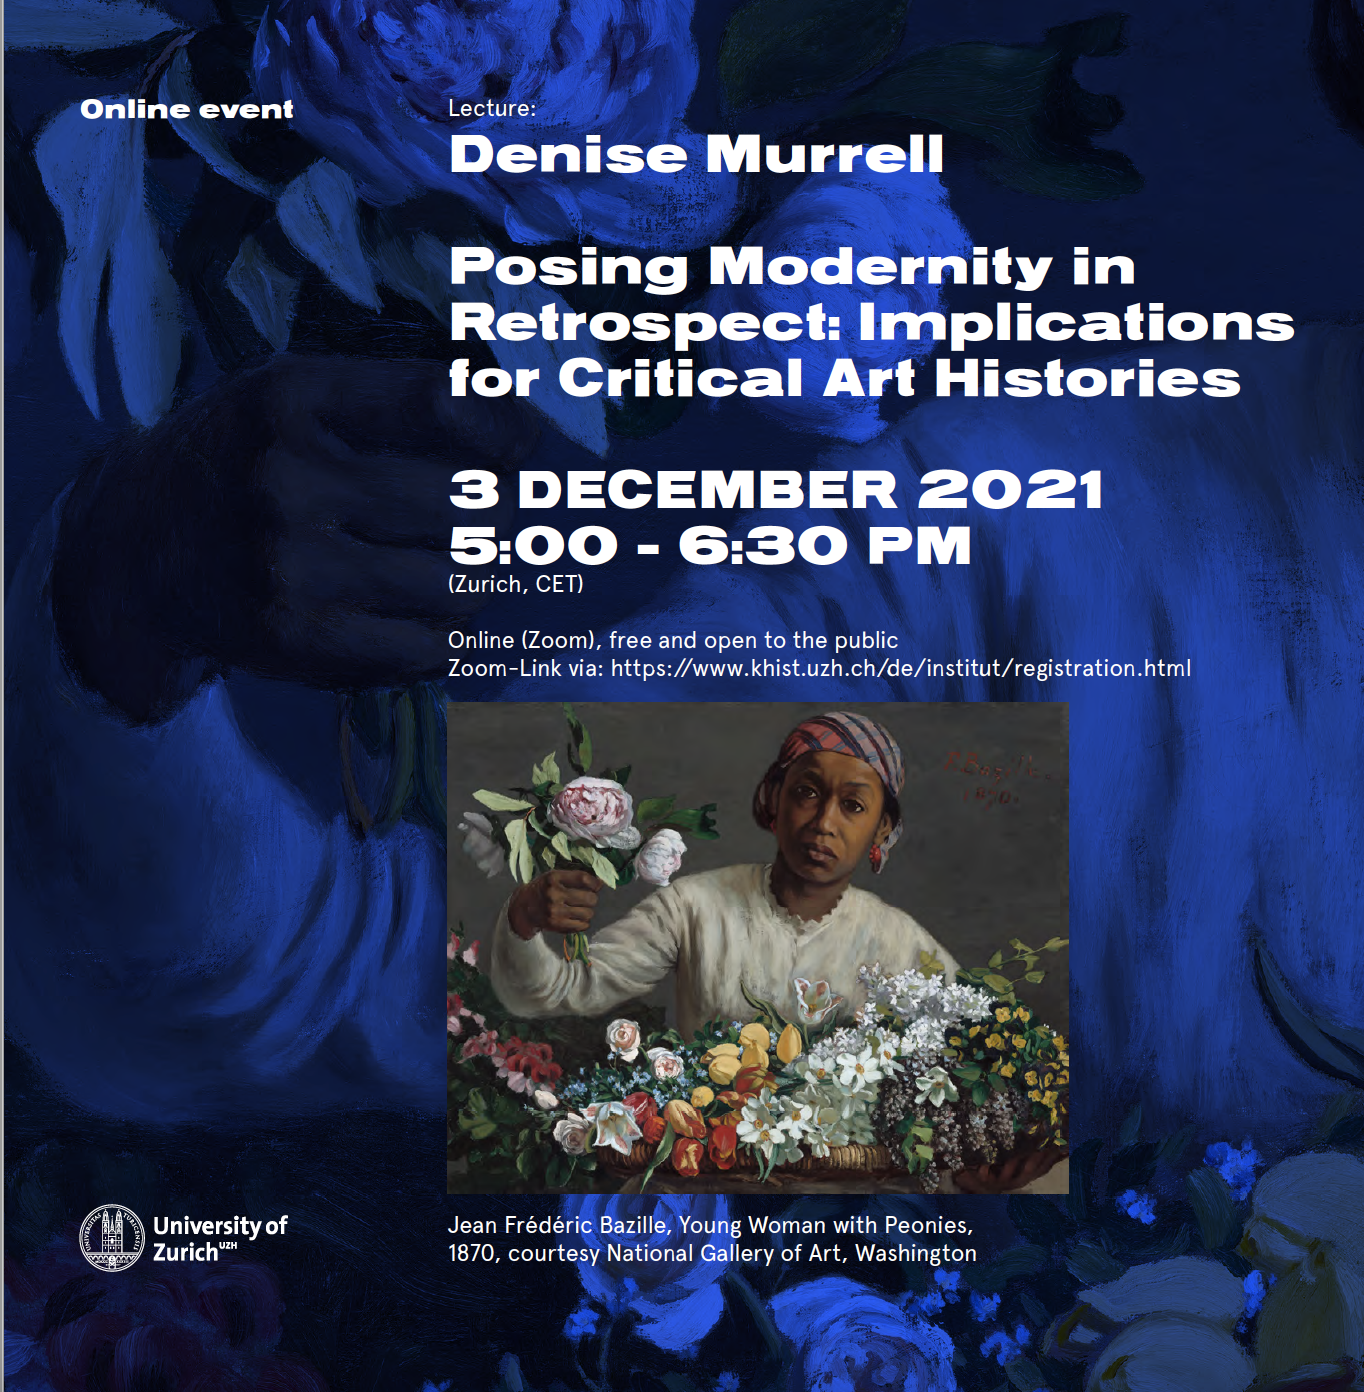 Lecture with Denise Murell